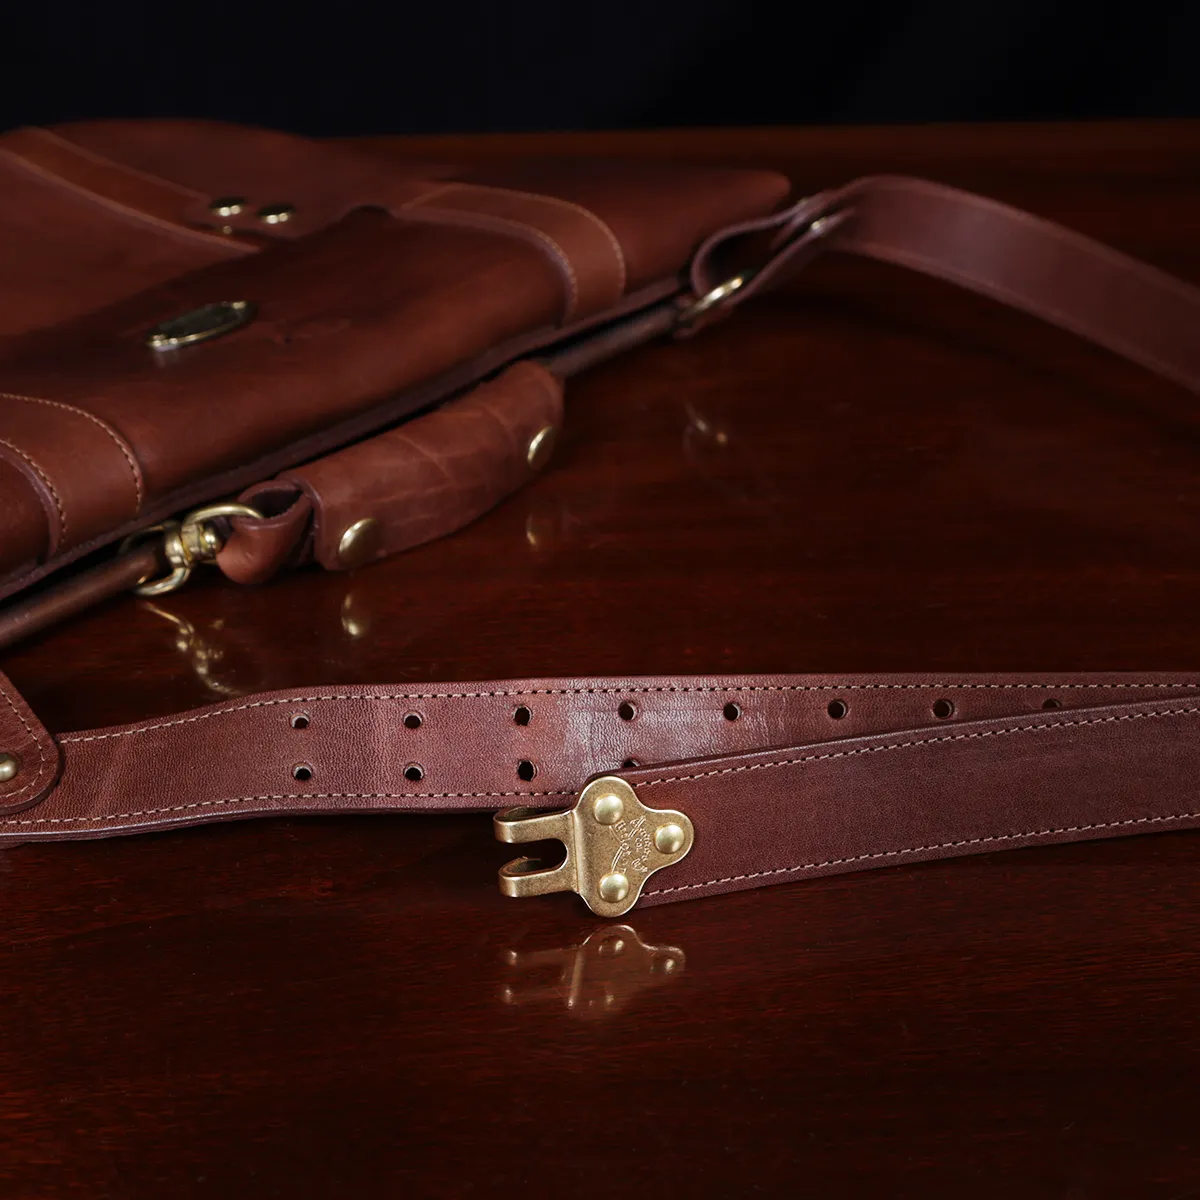 Handle Soft Trunk Other Leathers - Men - Small Leather Goods